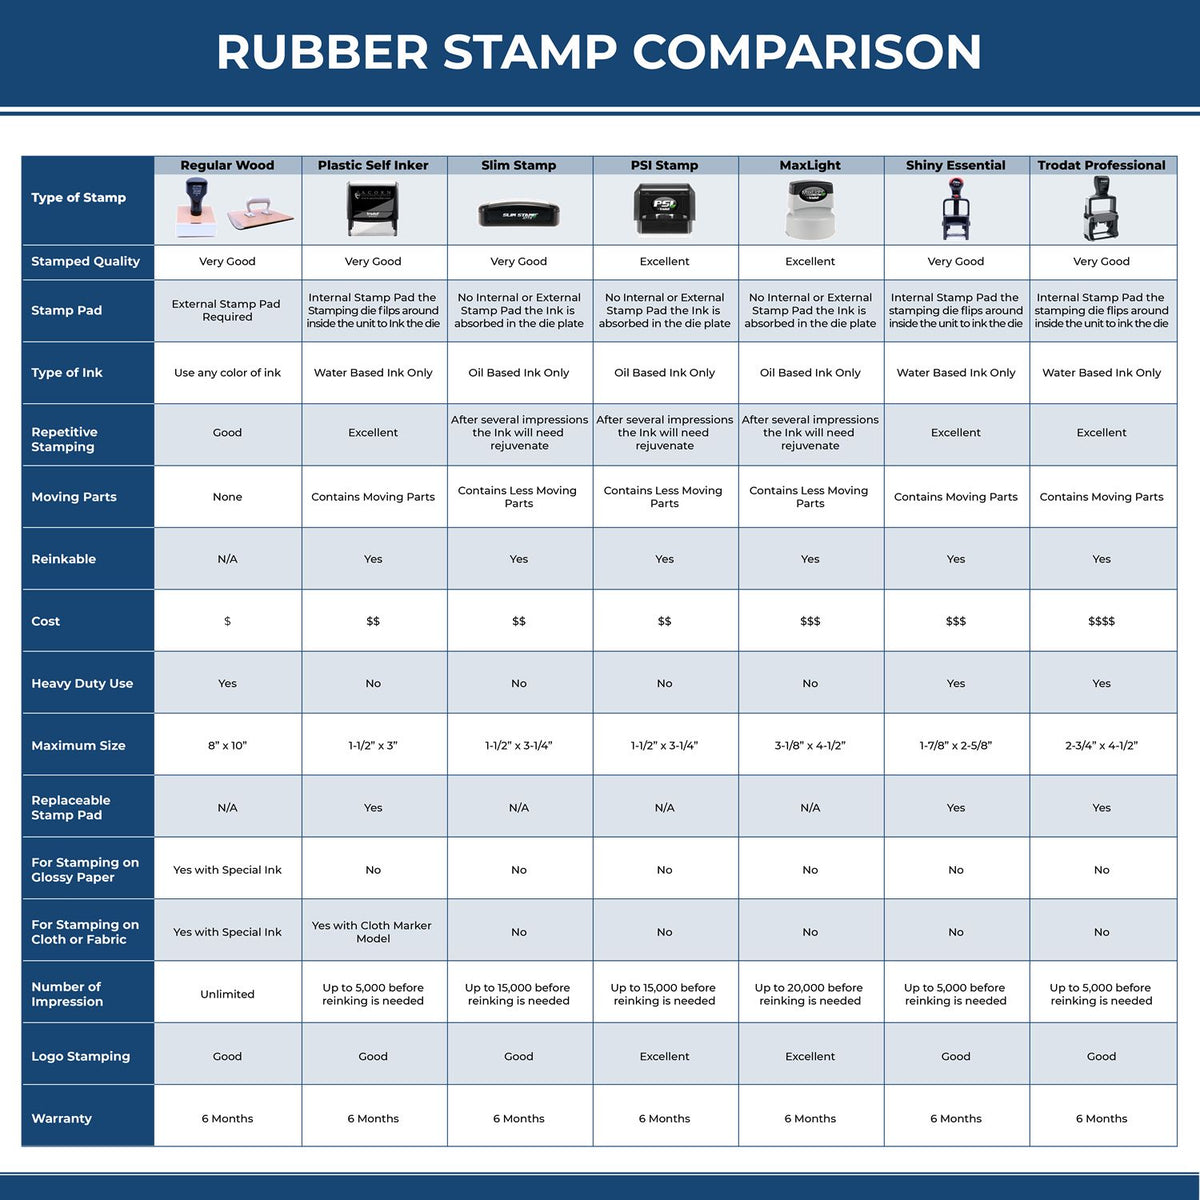 Faxed with Machine Rubber Stamp 4825R Rubber Stamp Comparison